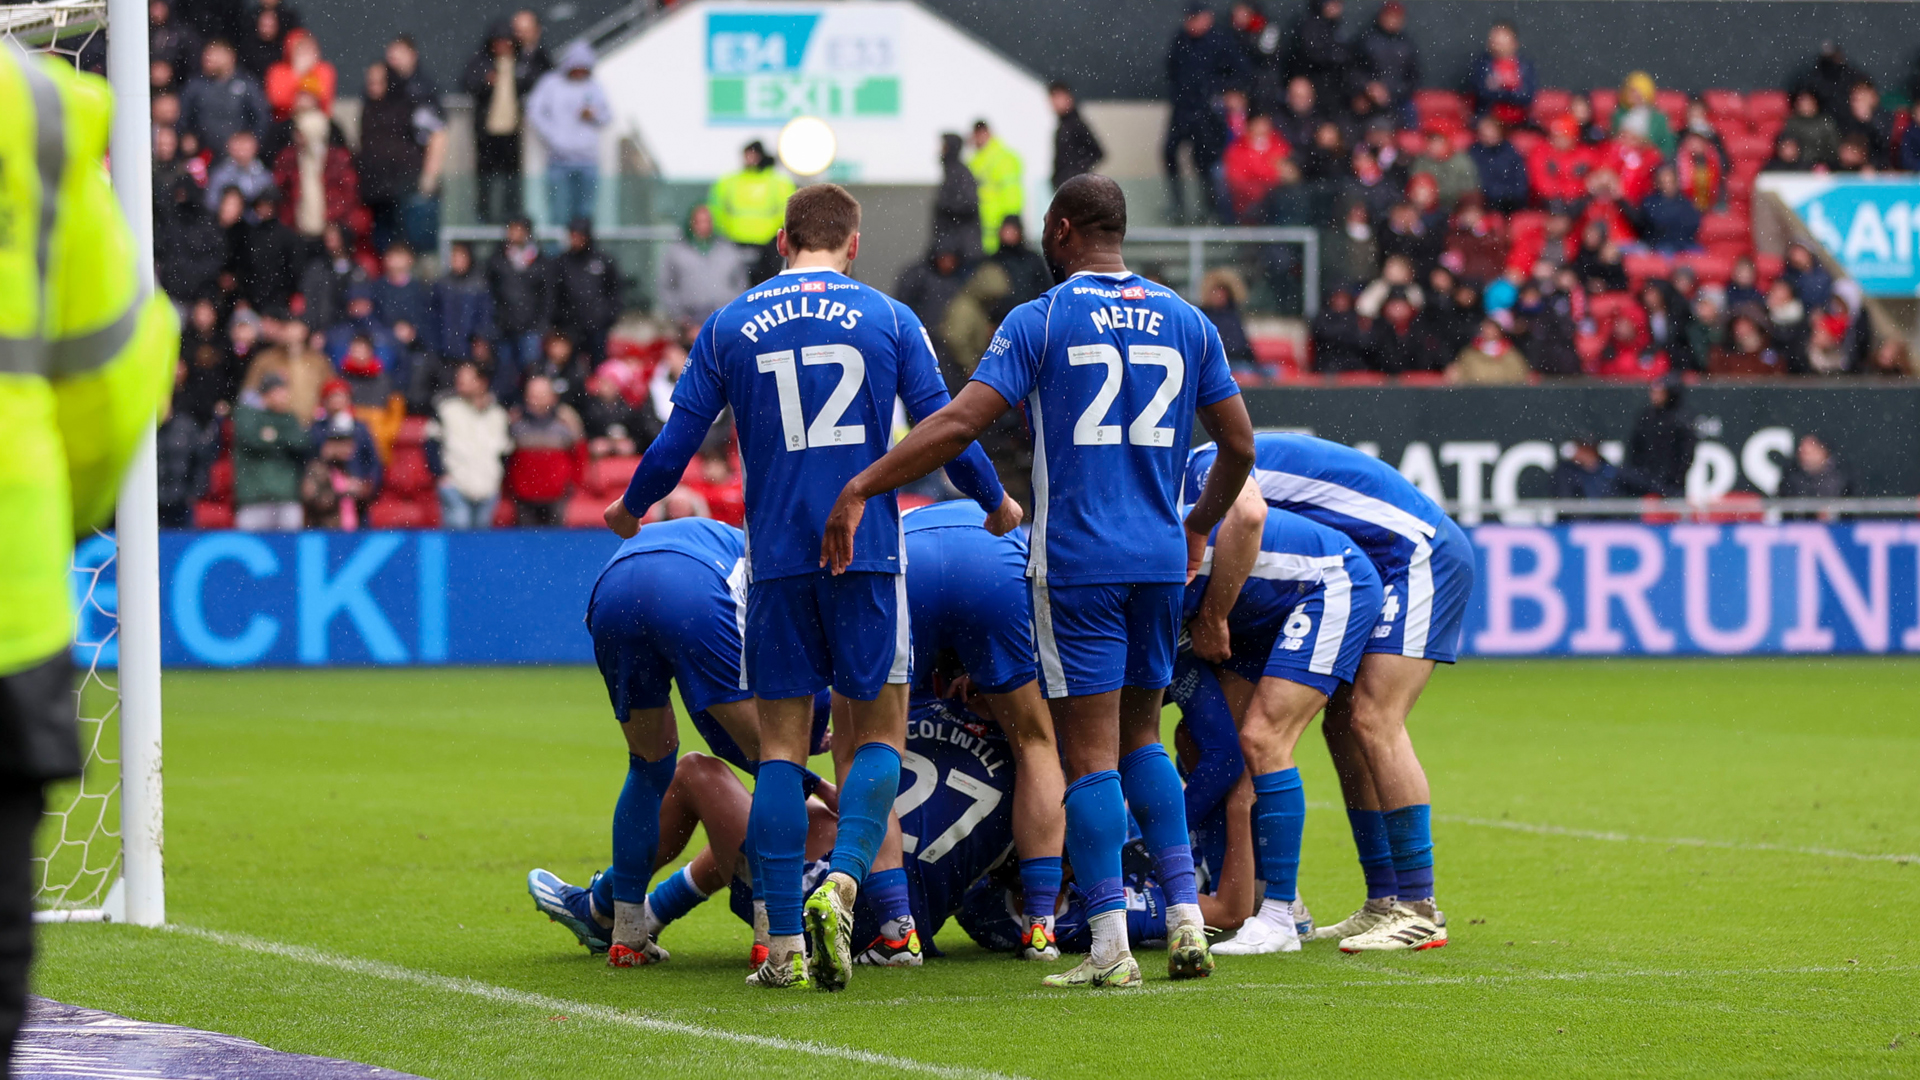 Cardiff City players celebrate against Bristol City